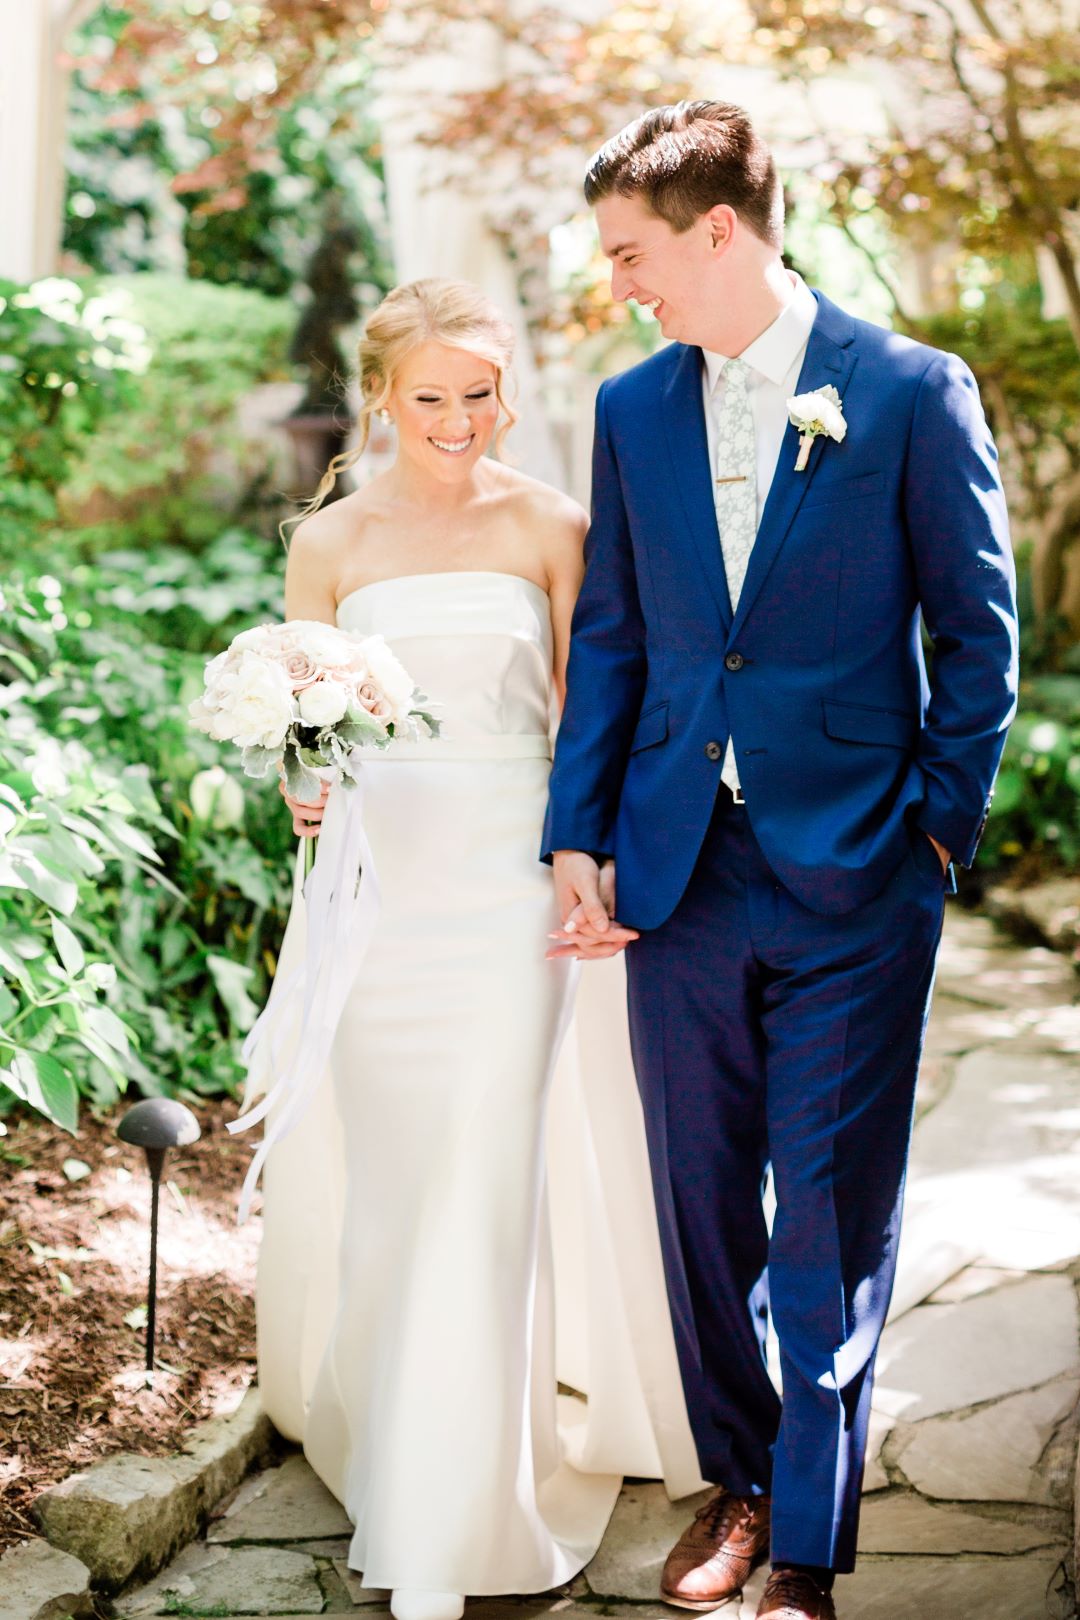 CJ's Off The Square | Bride and groom holding hands walking through the wedding venue's garden